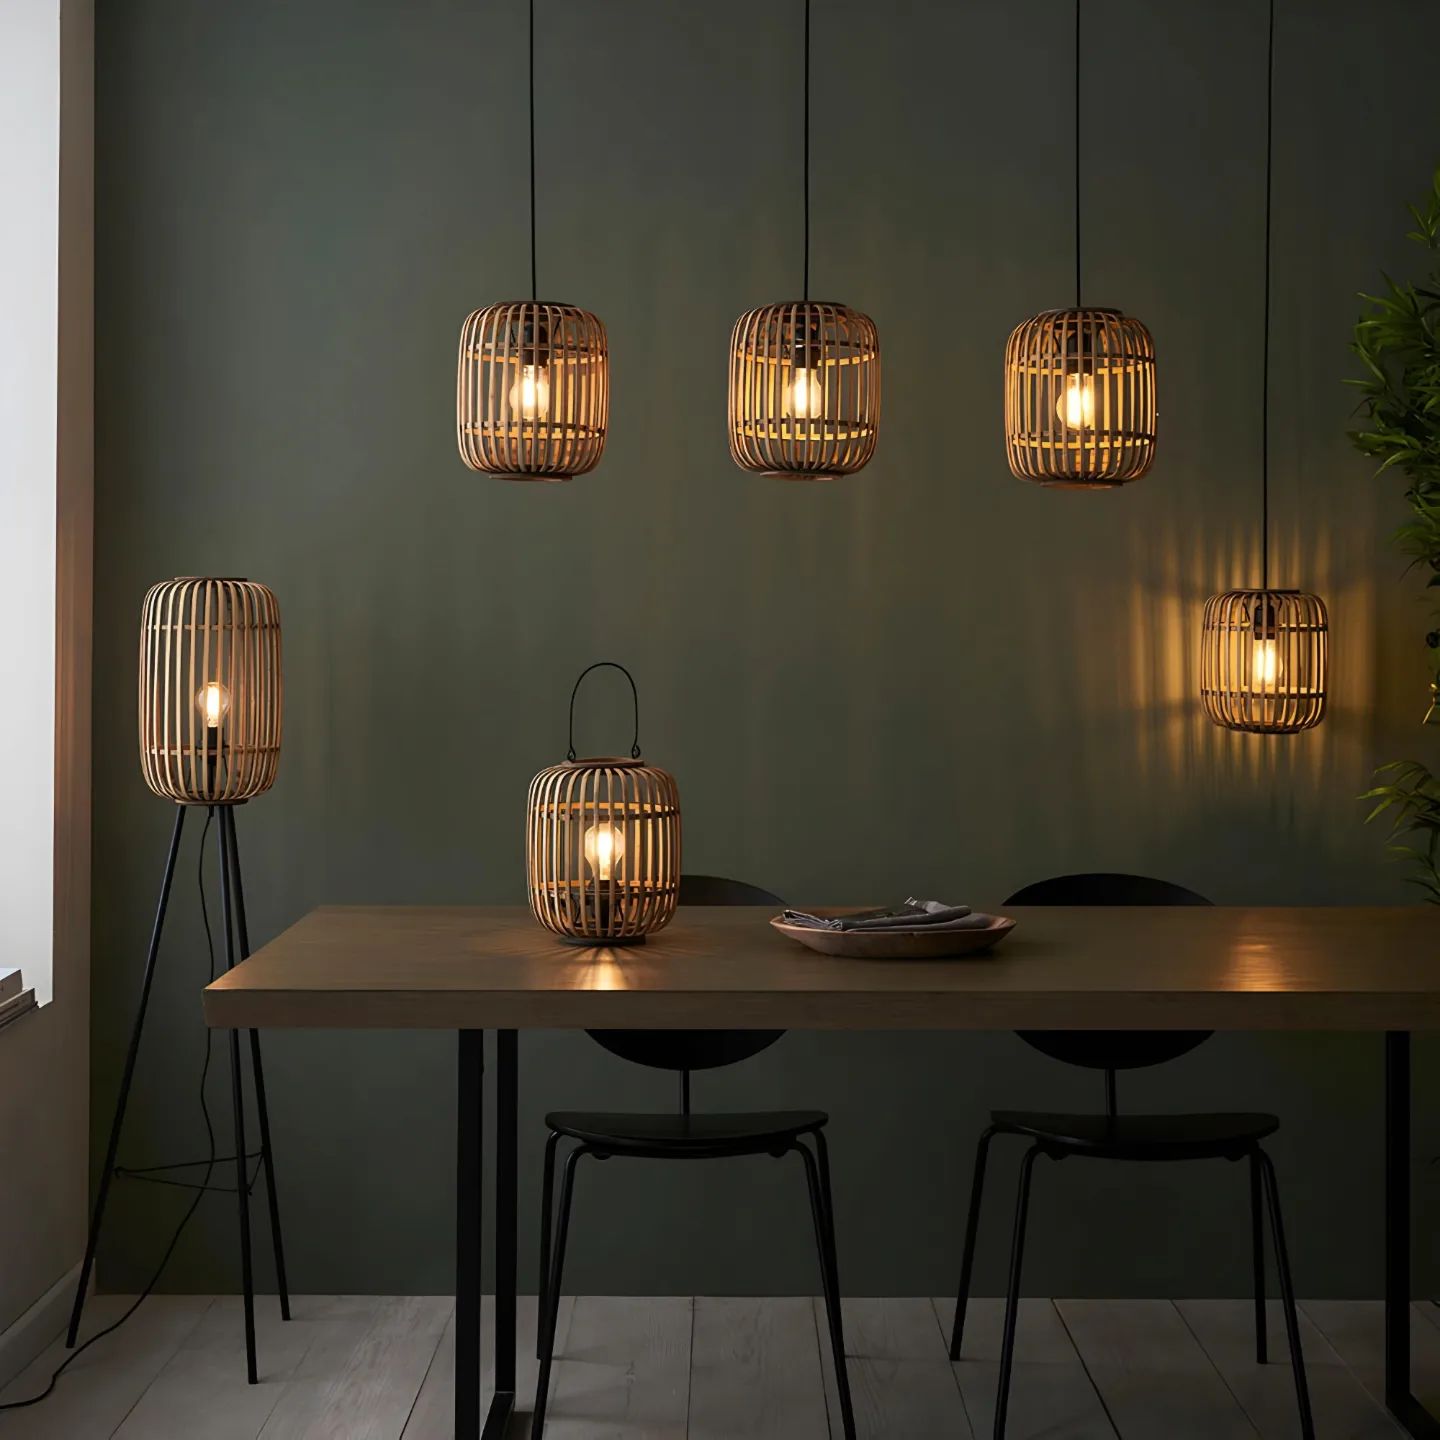 This simple and stylish lighting family is inspired by nature with sustainably sourced light or black bamboo cage, creating a soft warm light. Featuring a 3 light pendant, 1 light pendant, table lamp & floor lamp - all finished with matt black paint detailing. 💡

Search "bamboo cage" at stillorgandecor.ie for more details.